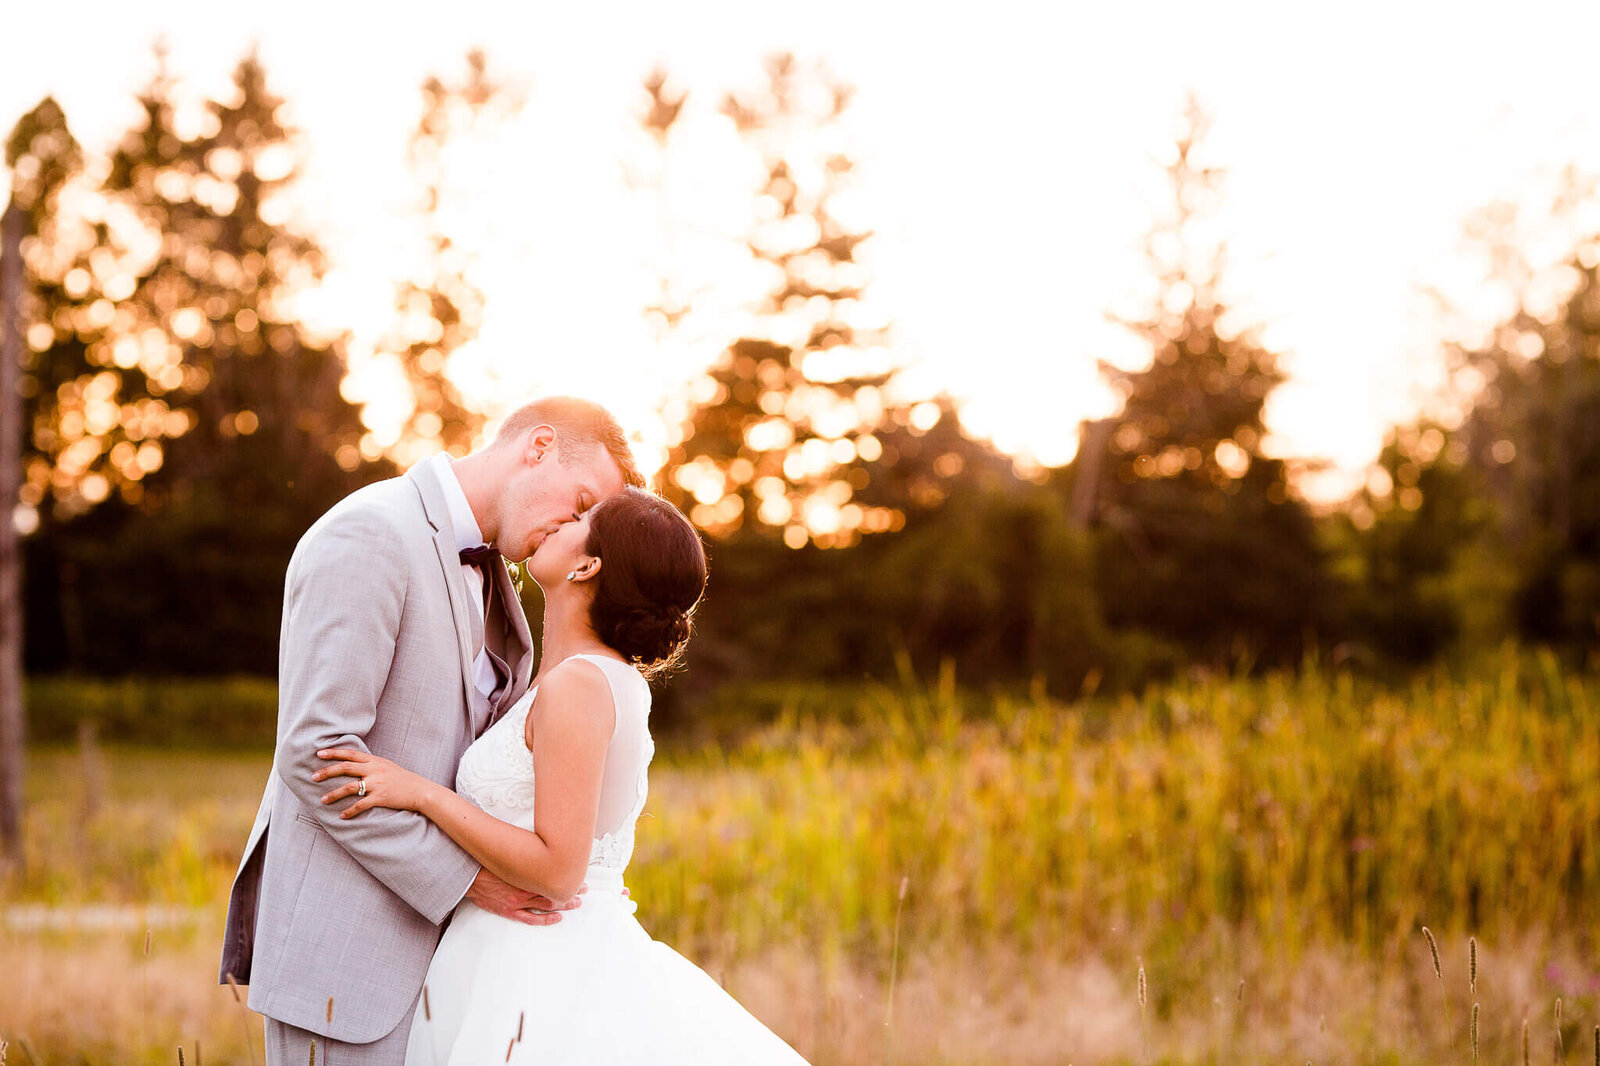 Bride and groom kiss in field at sunset.